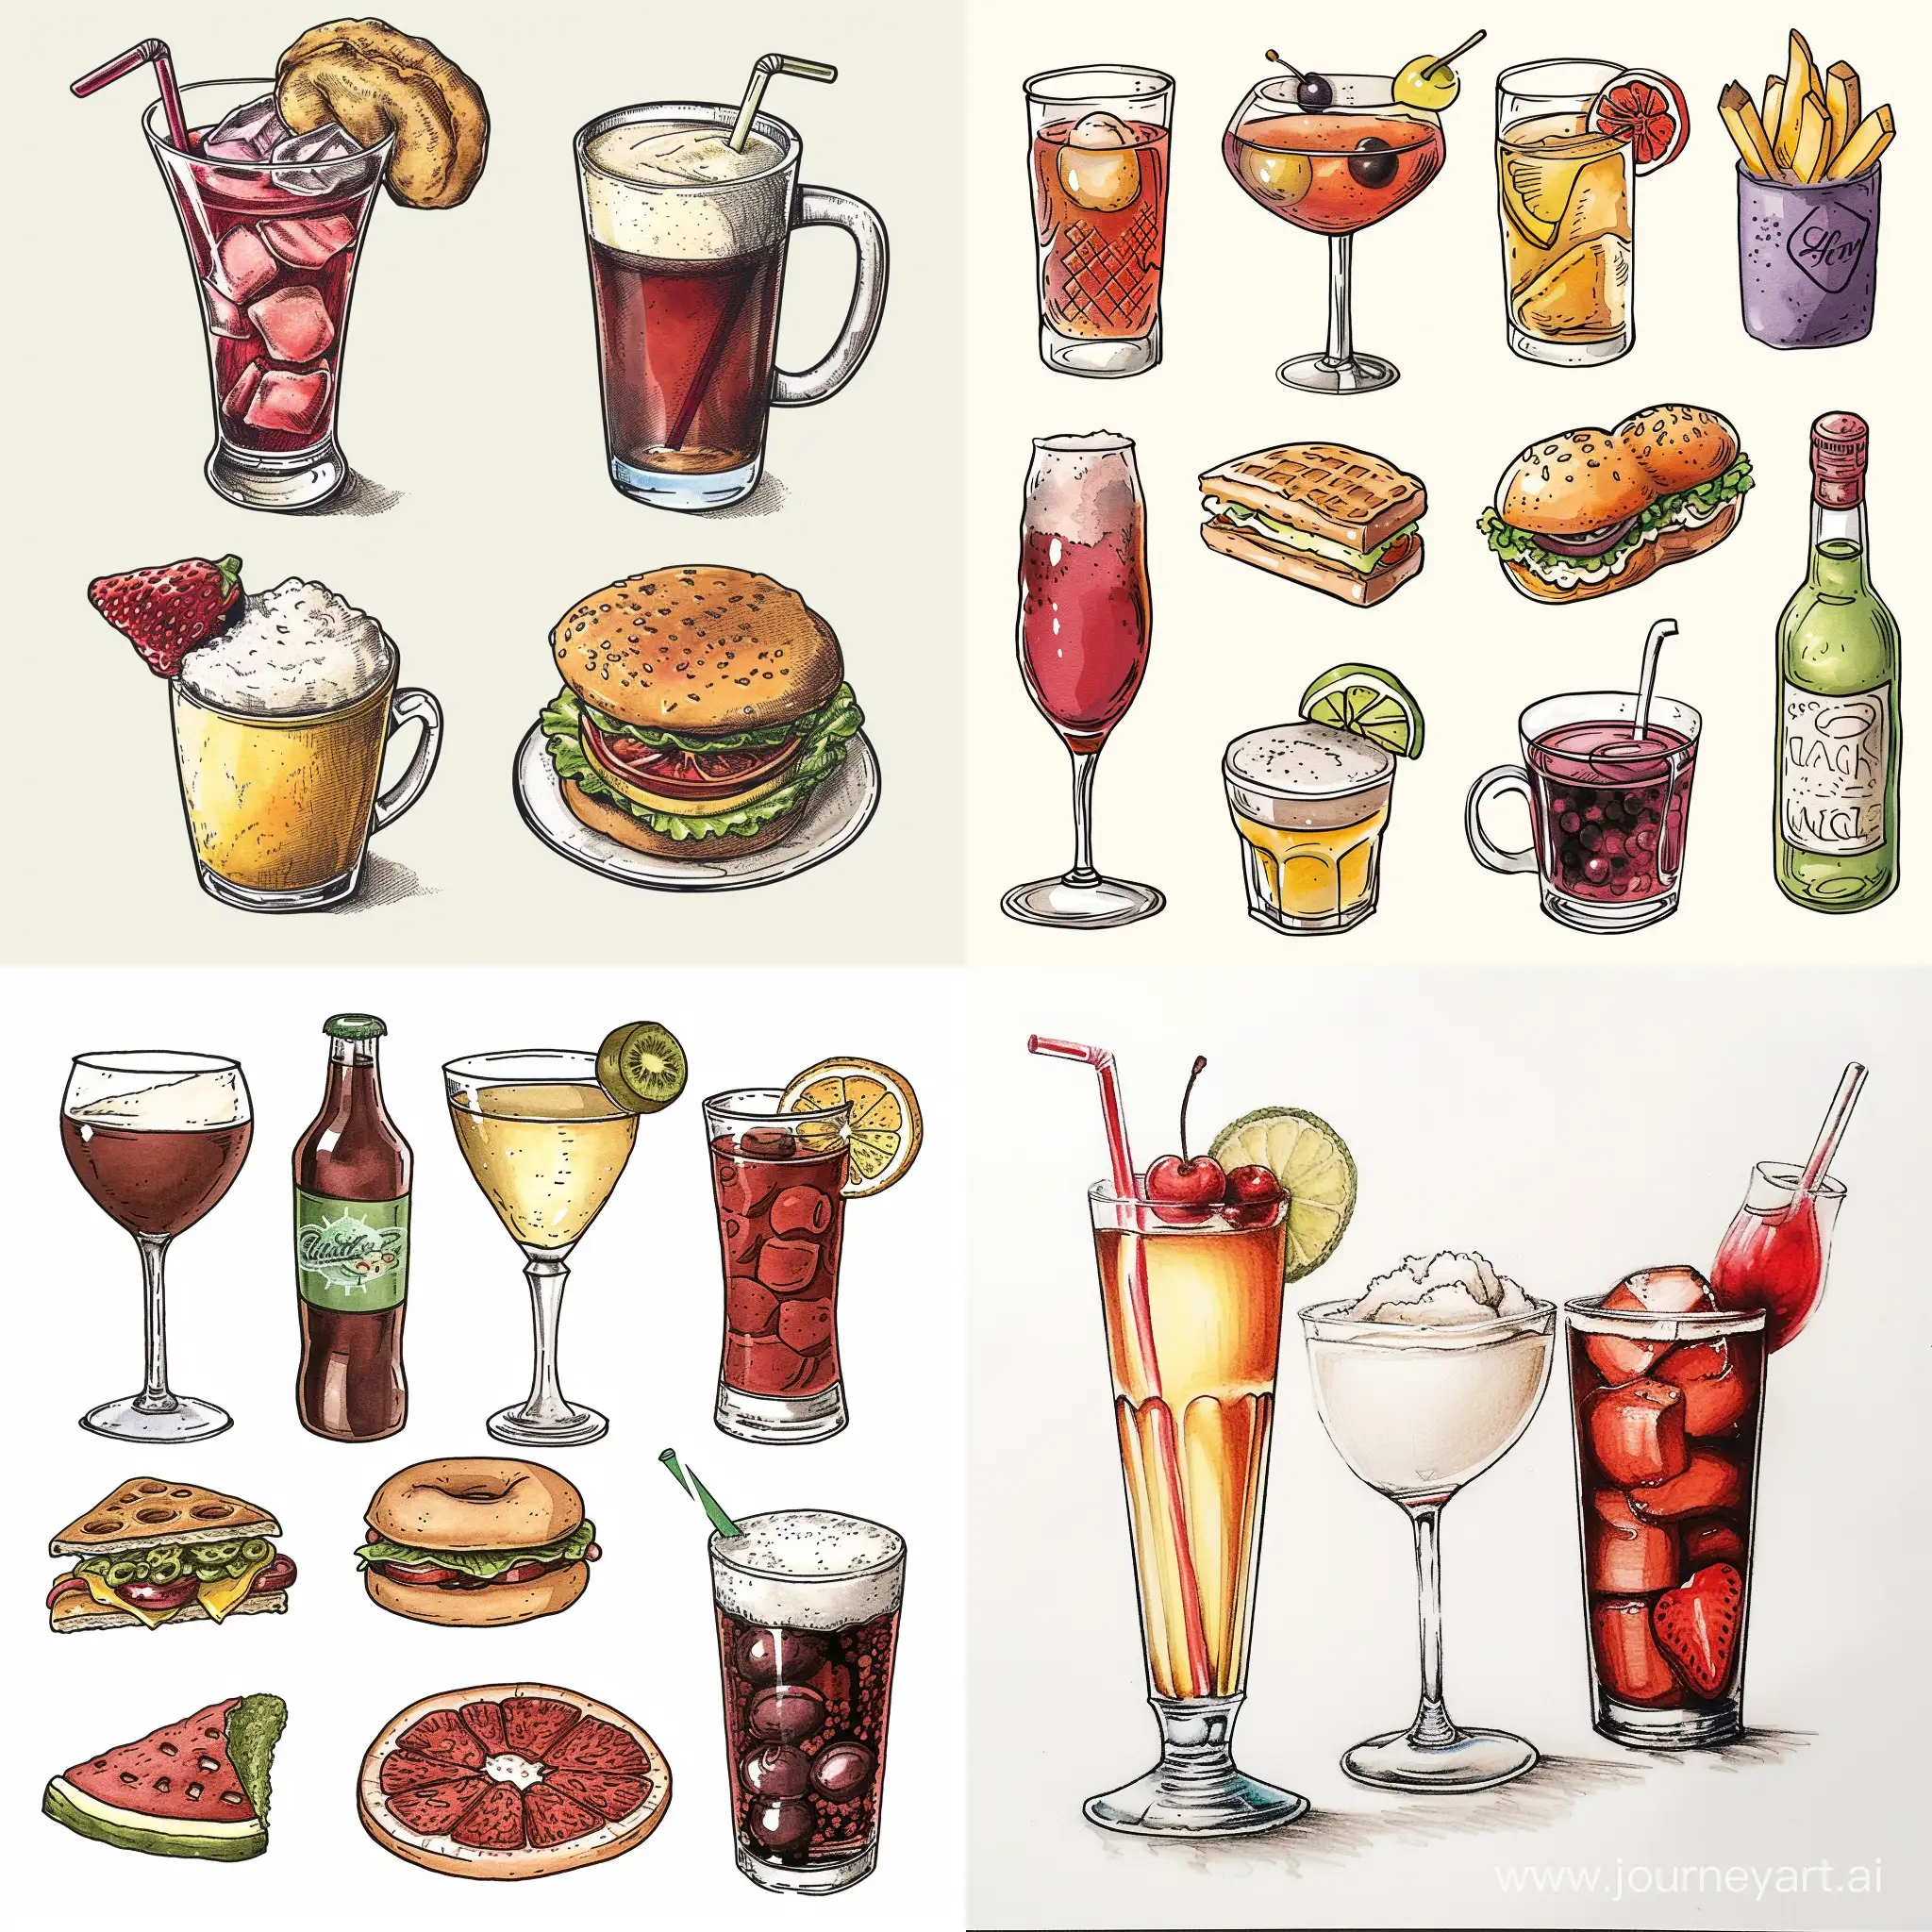 draw food and beverages